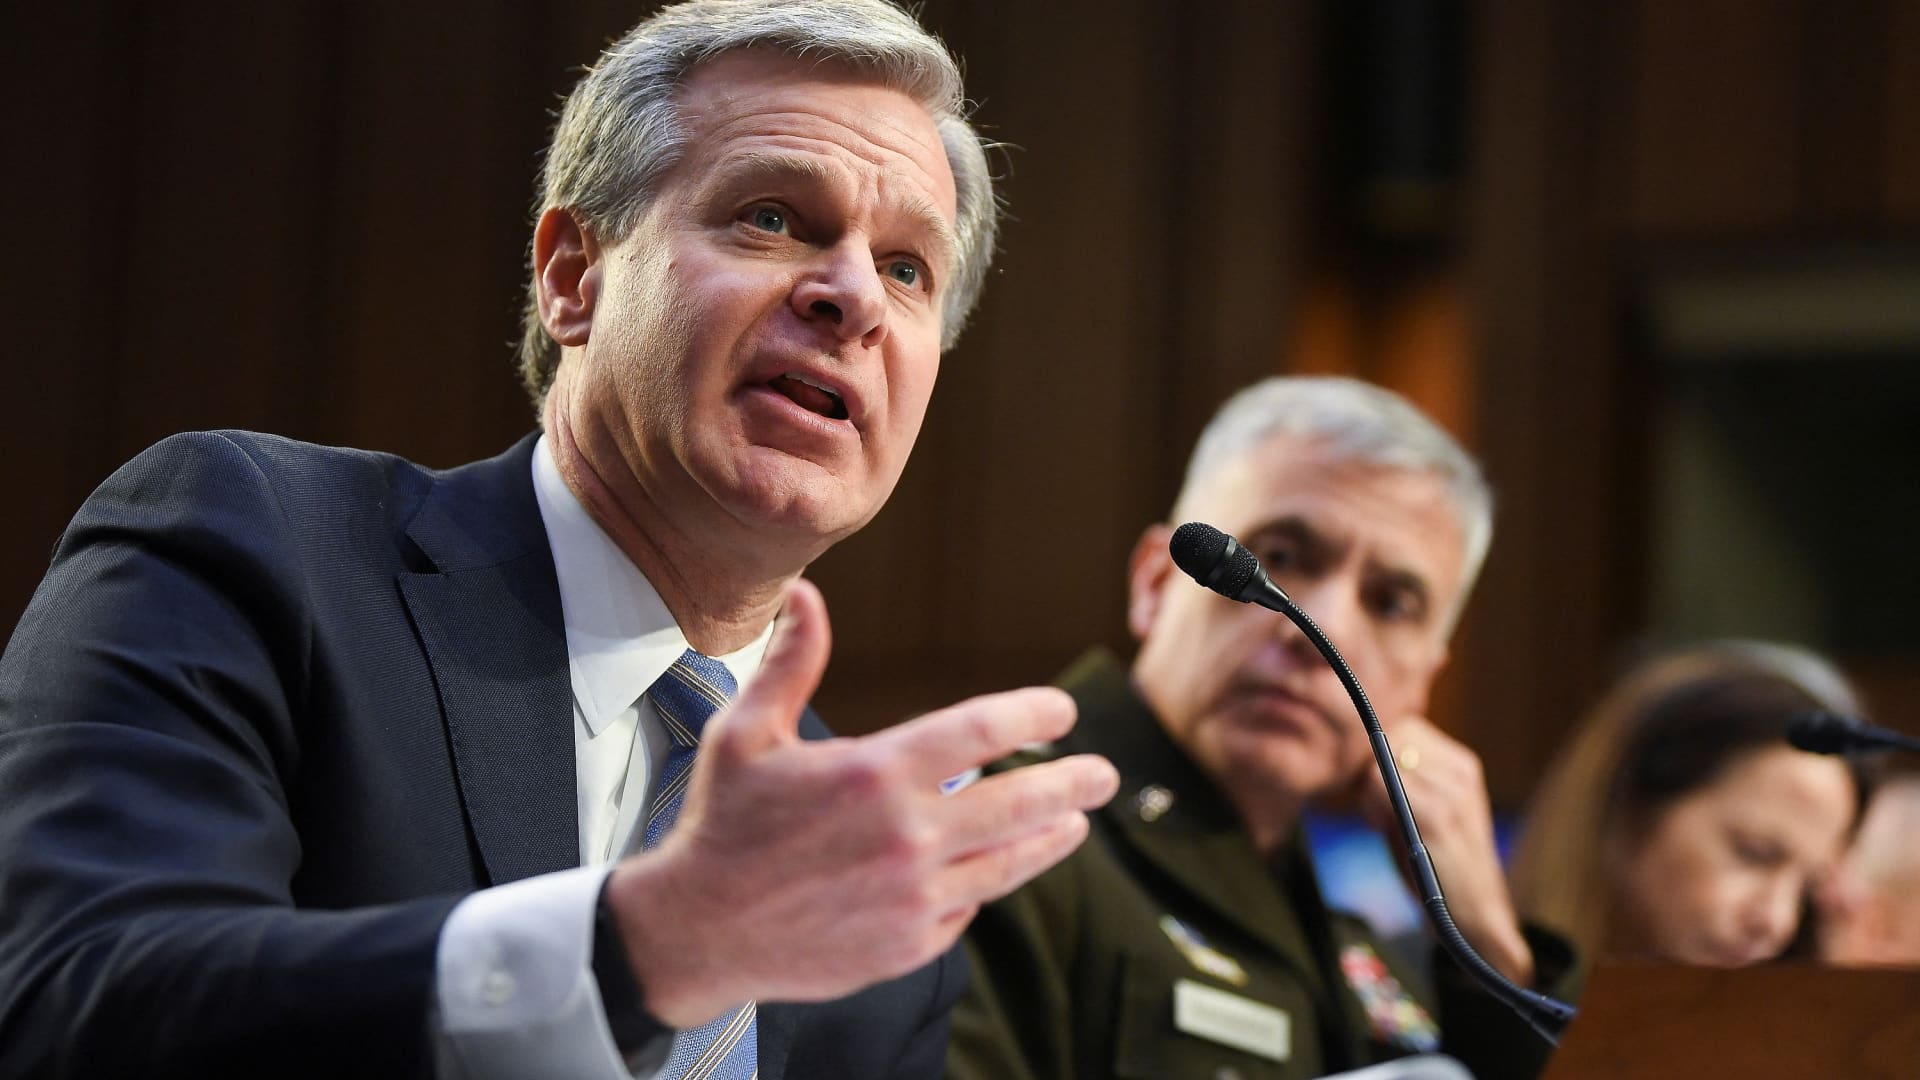 Chinese hackers outnumber FBI cyber staff 50 to 1, director Wray says